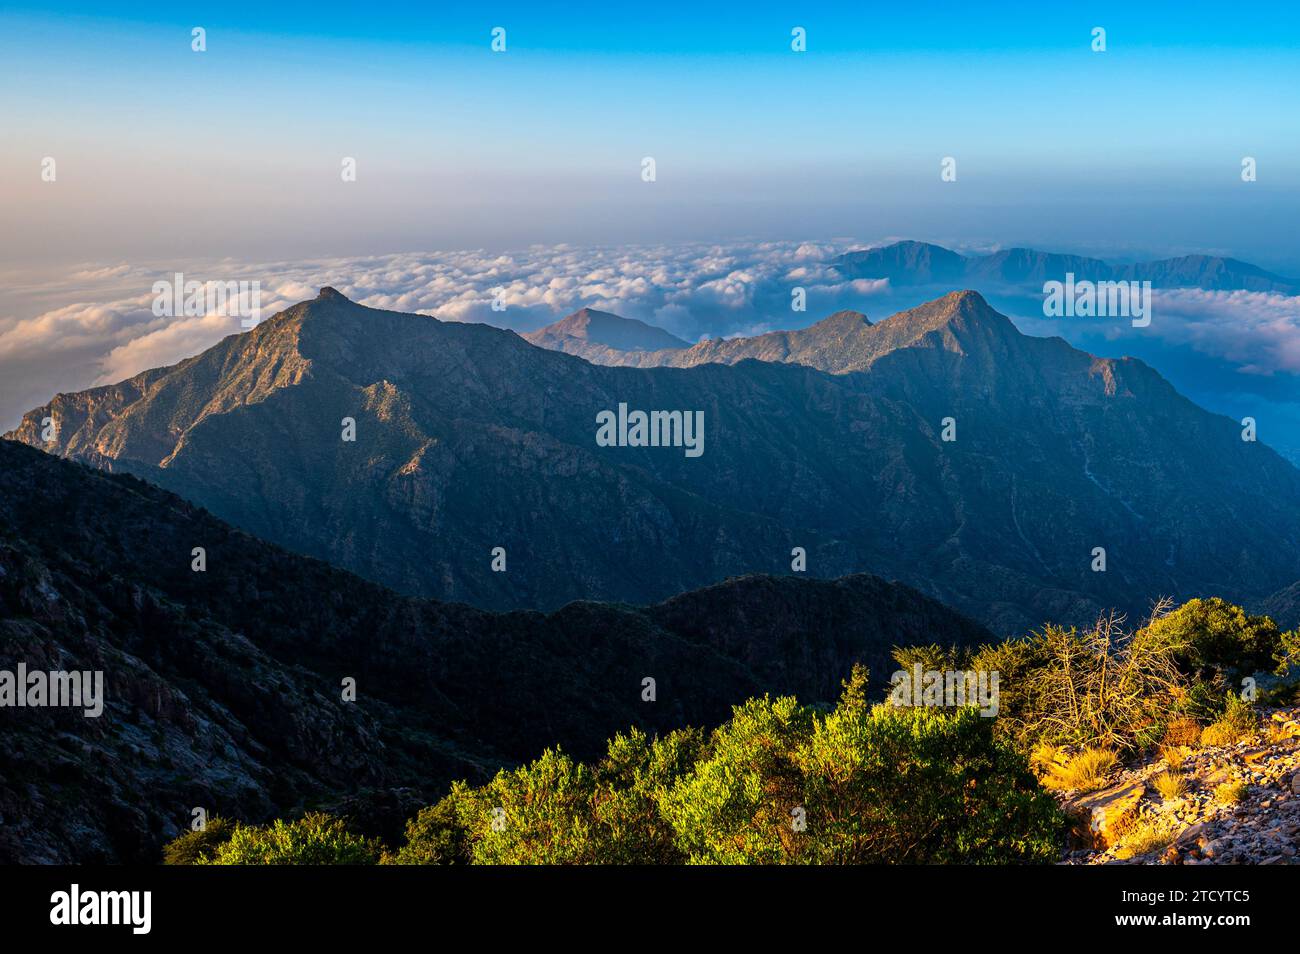 Colorful landscape background at sunrise in the Asir Mountains in Saudi Arabia. Stock Photo